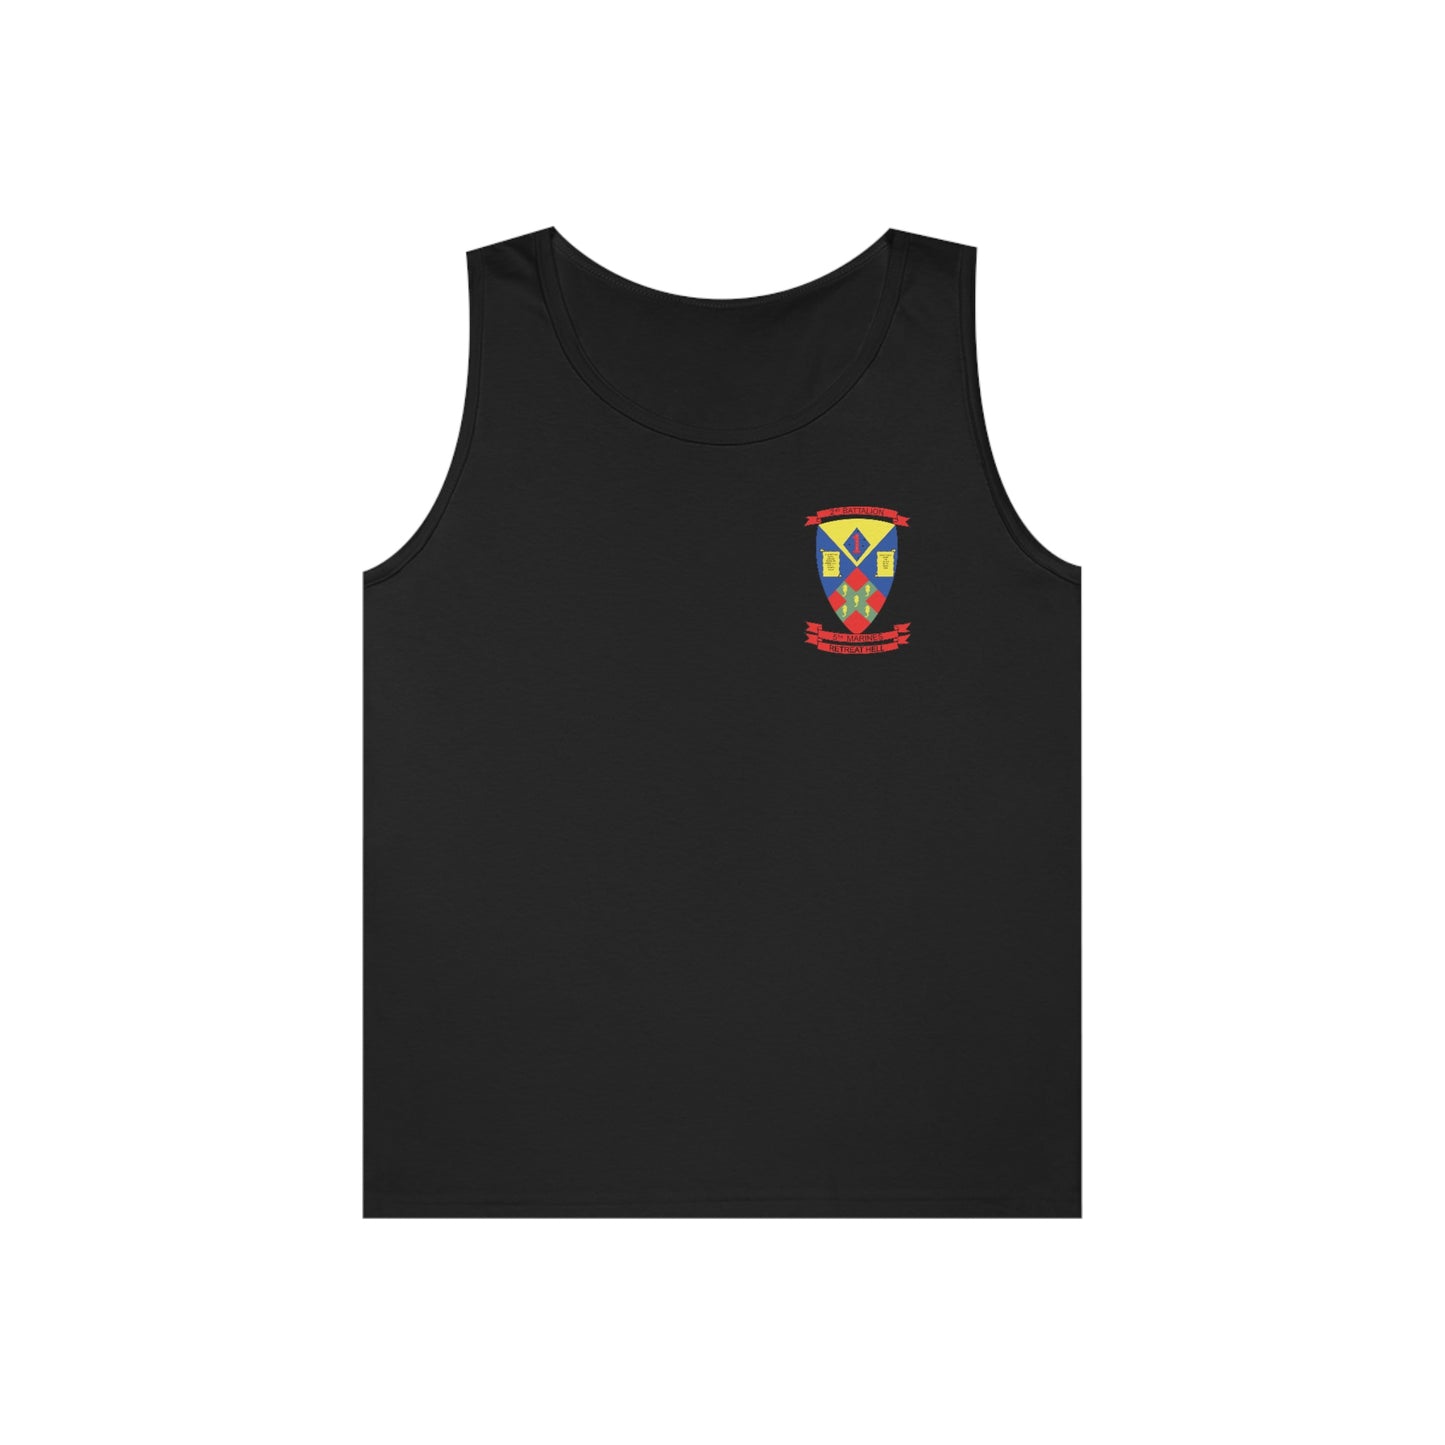 Weapons Co 2/5 Tank Top